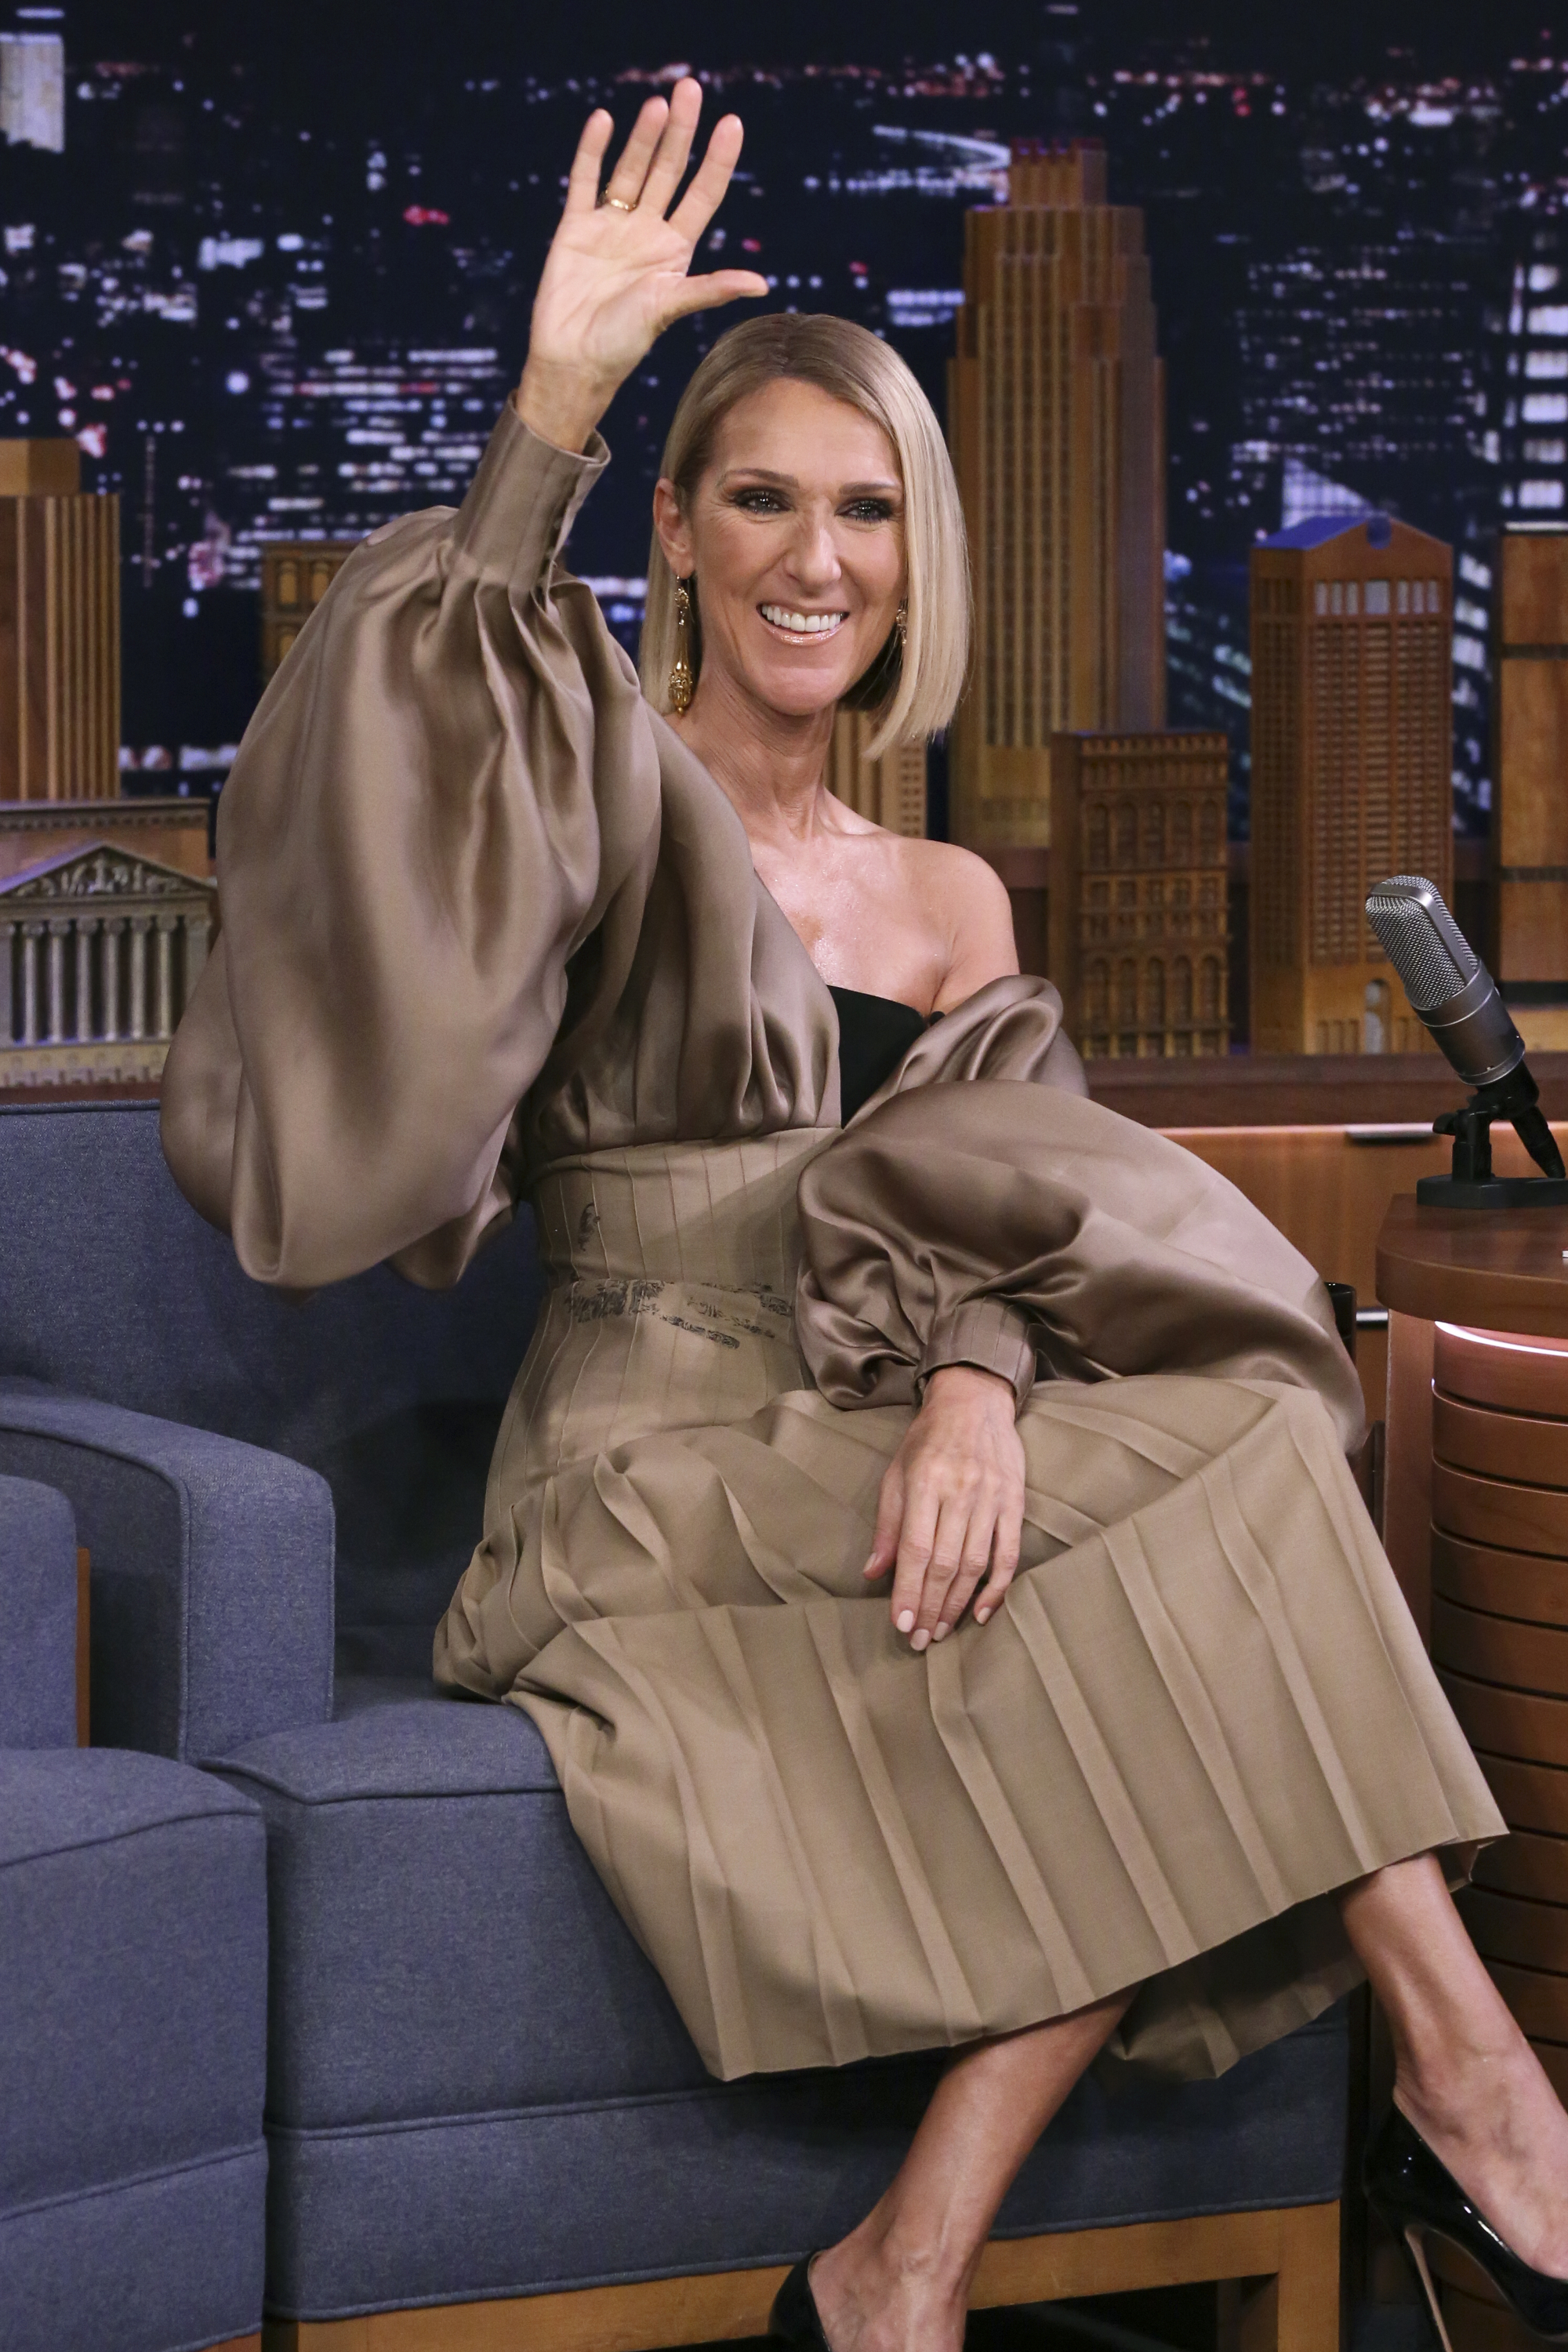 Celine Dion during an interview on Jimmy Fallon's "The Tonight Show" on November 15, 2019 | Source: Getty Images